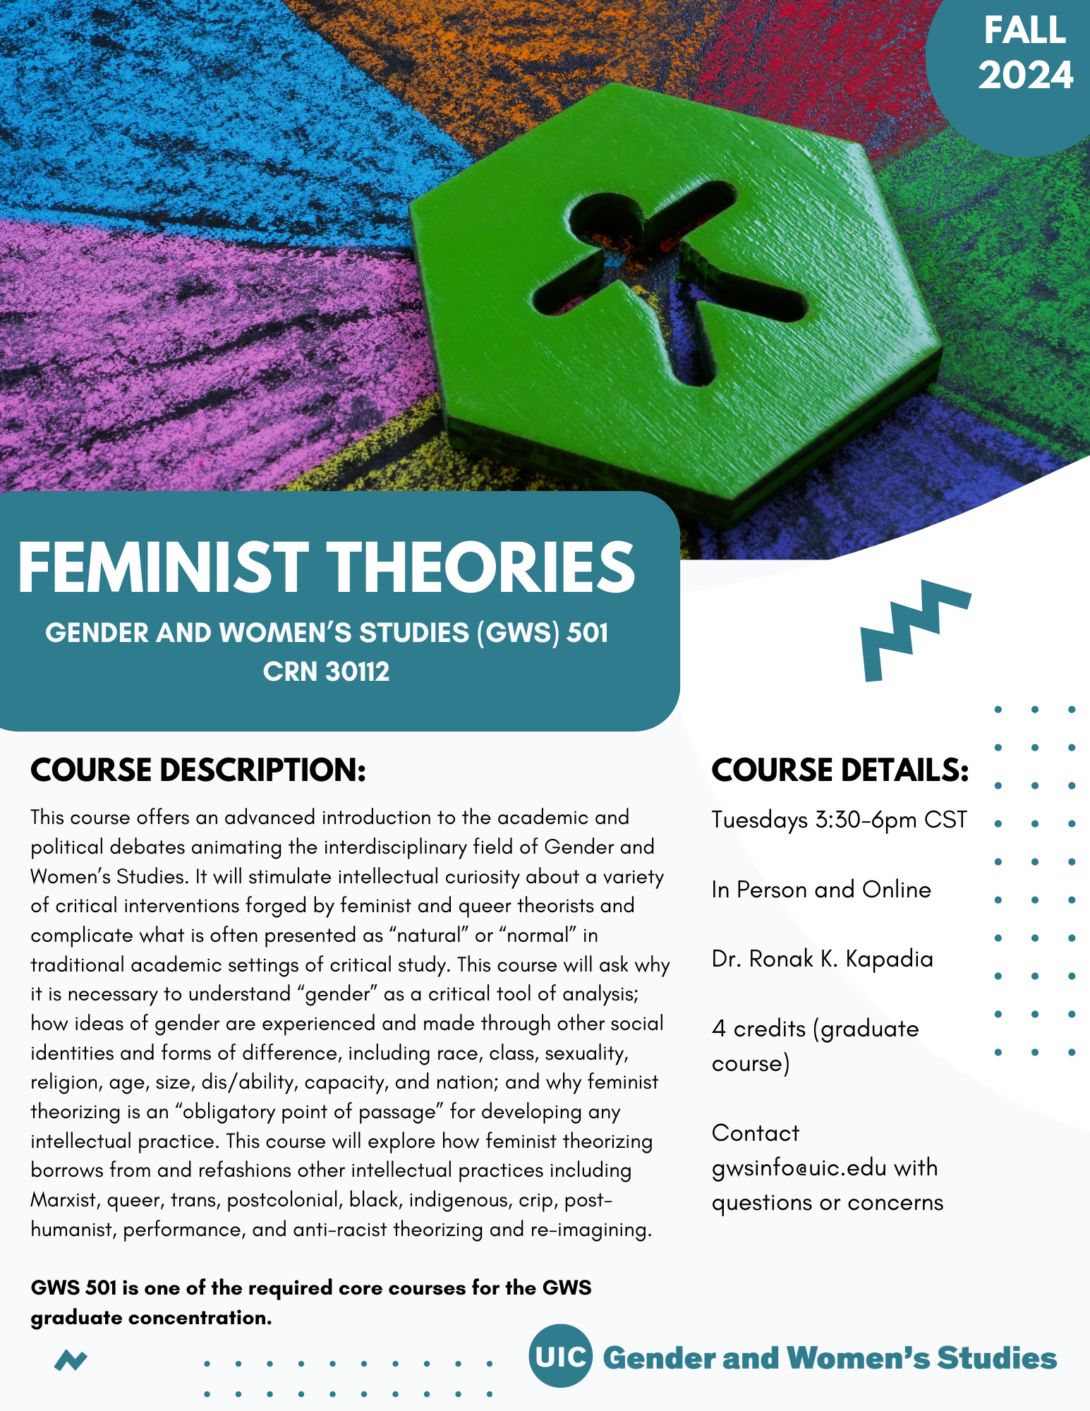 A flyer promoting the fall 2024 Feminist Theories Life course. The top portion of the flyer includes a photo of a stick figure cutout out of a green hexagon object. The object is placed atop a multi-colored background. In the top right corner is a teal circle with Fall 2024 inside it in white text. The bottom left portion of the photo is covered with a teal block that includes the course title in white text. Below that is the course description and course details in black text on a white background. A teal GWS logo appears in the bottom right of the flyer. Parallel lines of teal dots and teal geometric designs decorate the page.